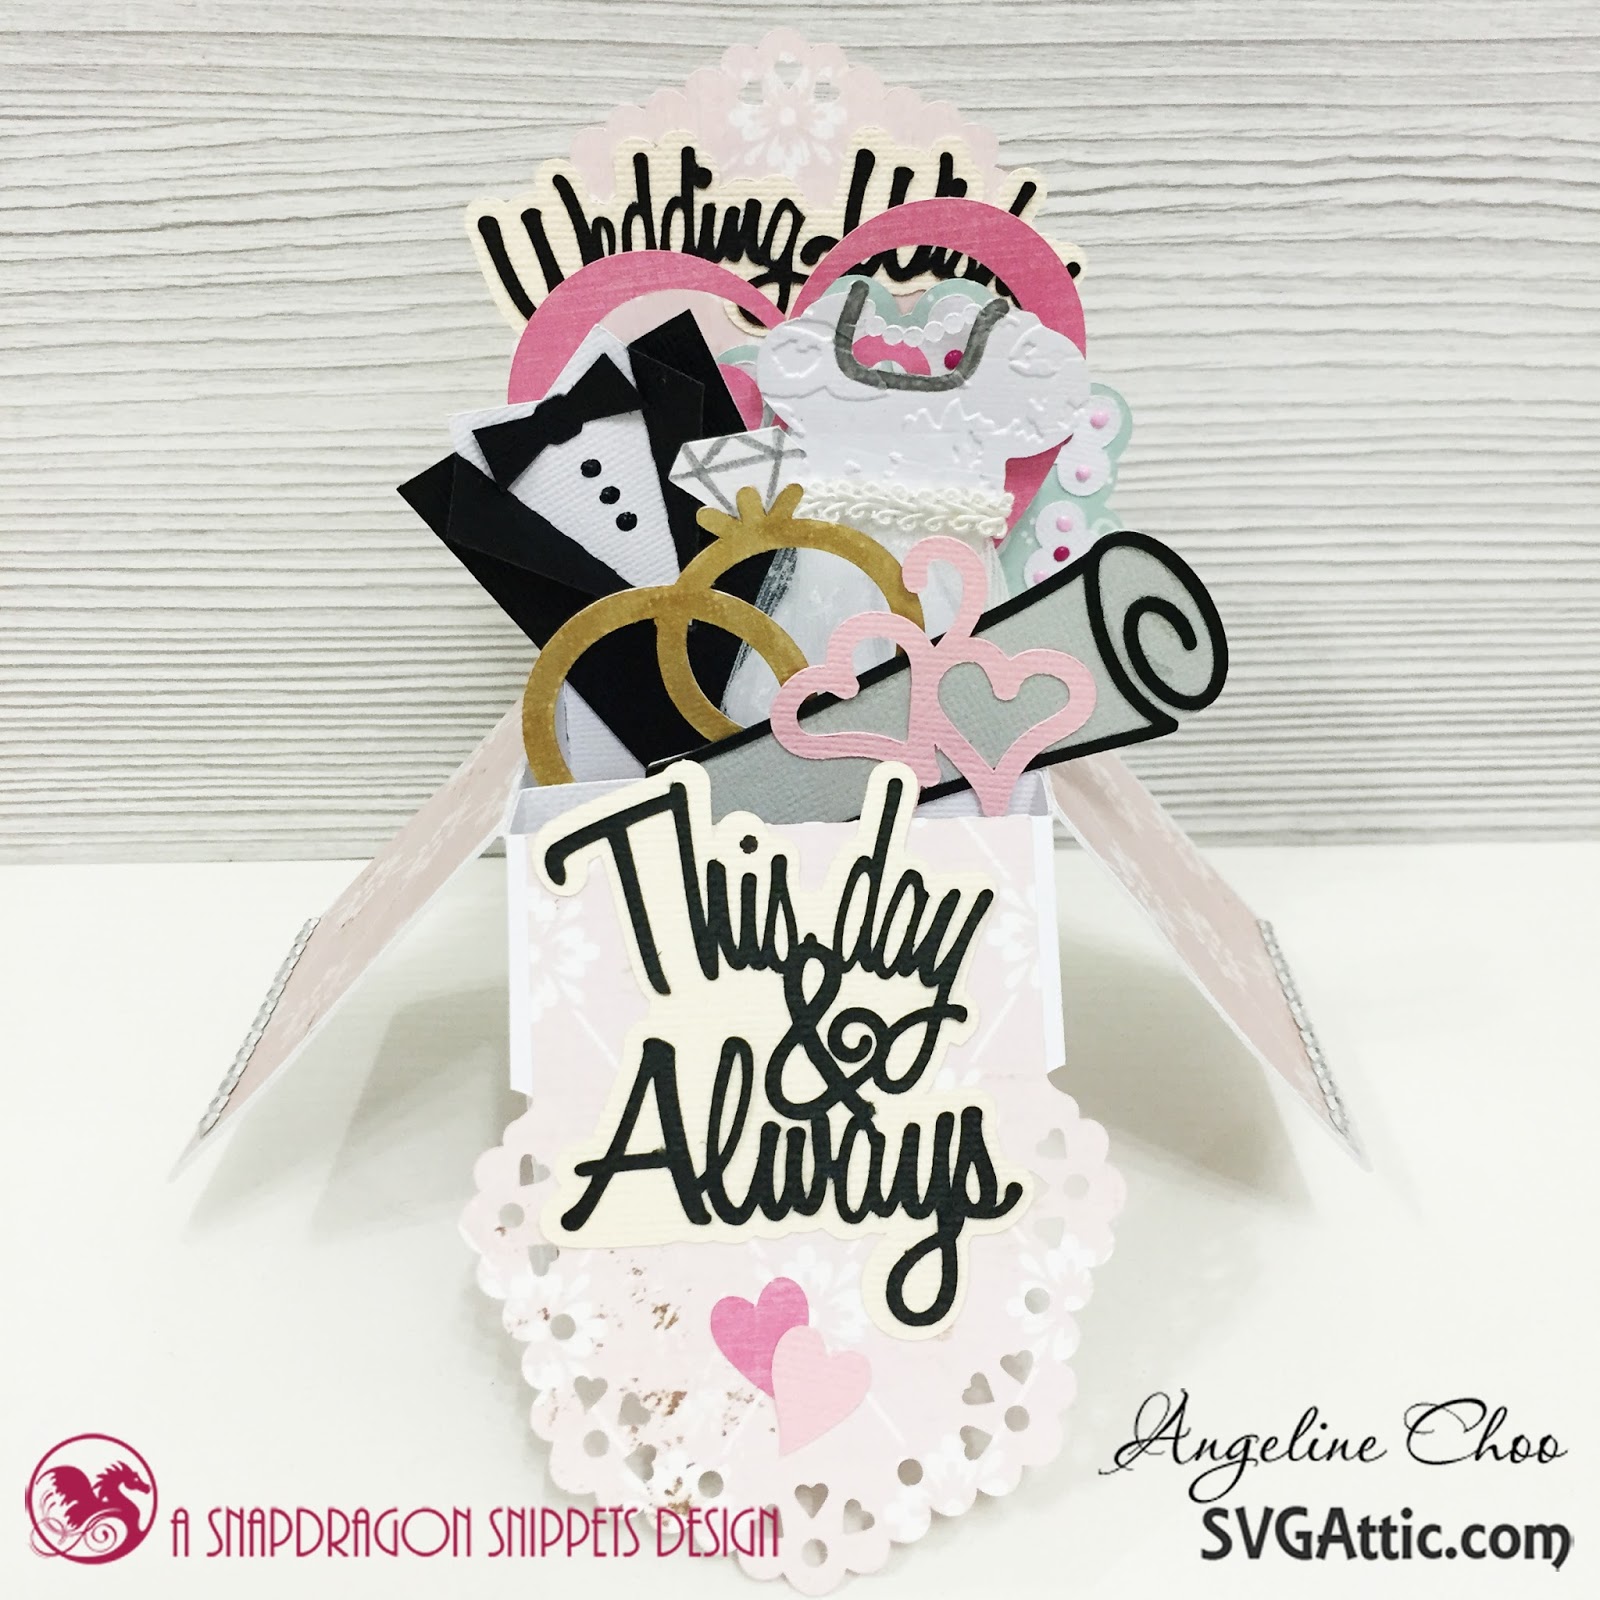 Download SVG Attic Blog: Wedding Wishes with Angeline